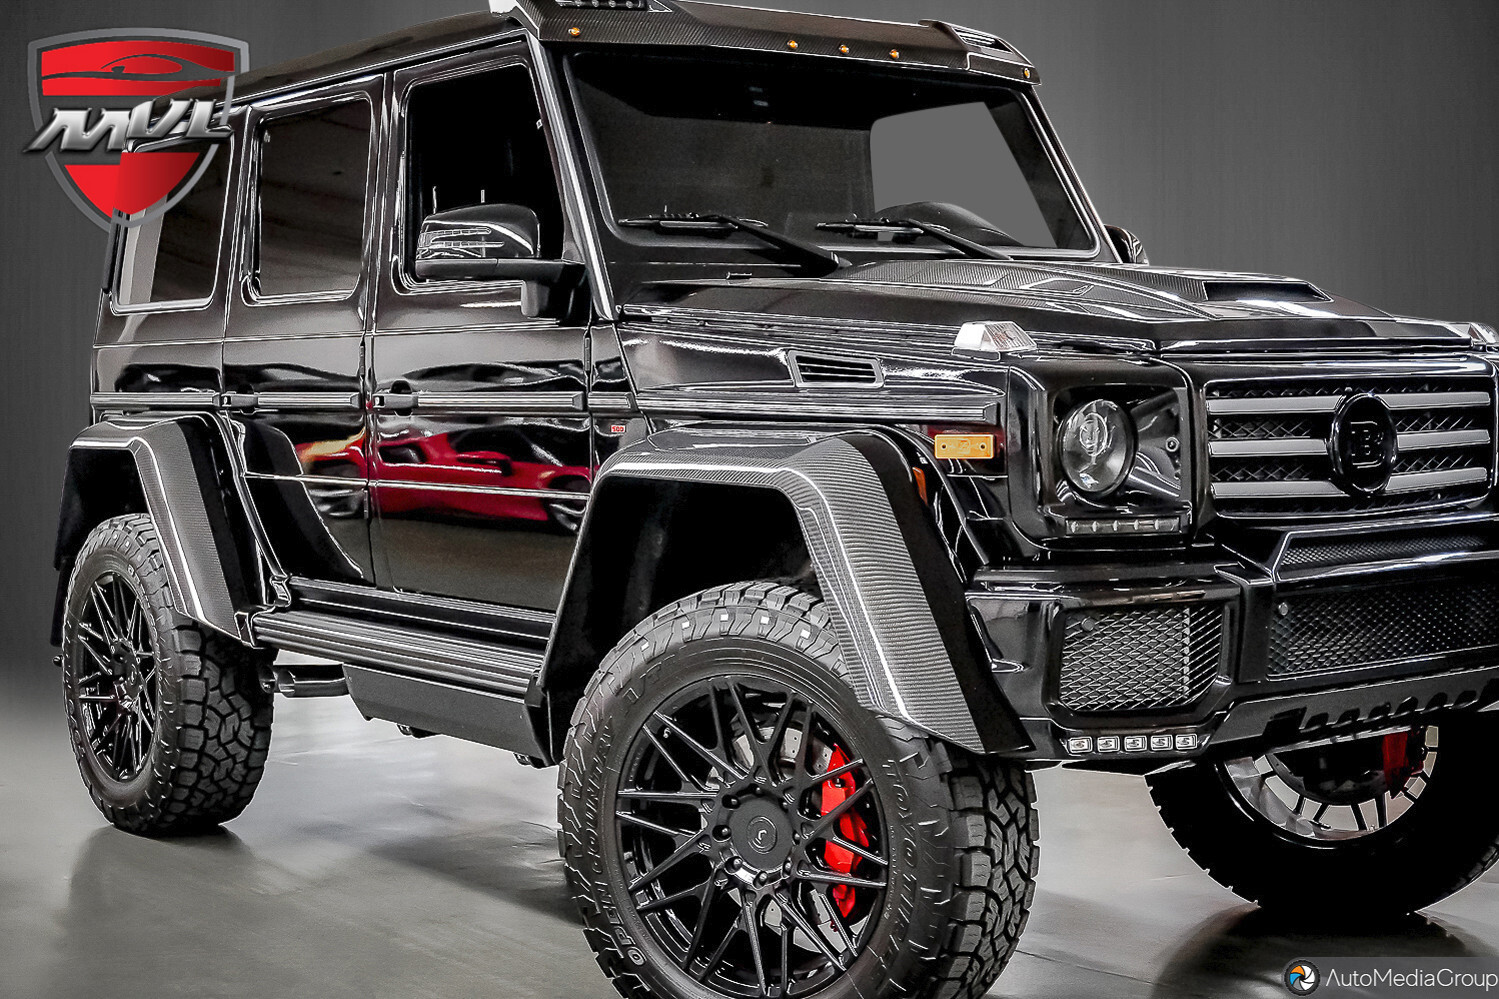 2017 Mercedes-Benz G-Class -SPECIAL LEASE RATE 7.99%- BRABUS 500 4x4 Squared